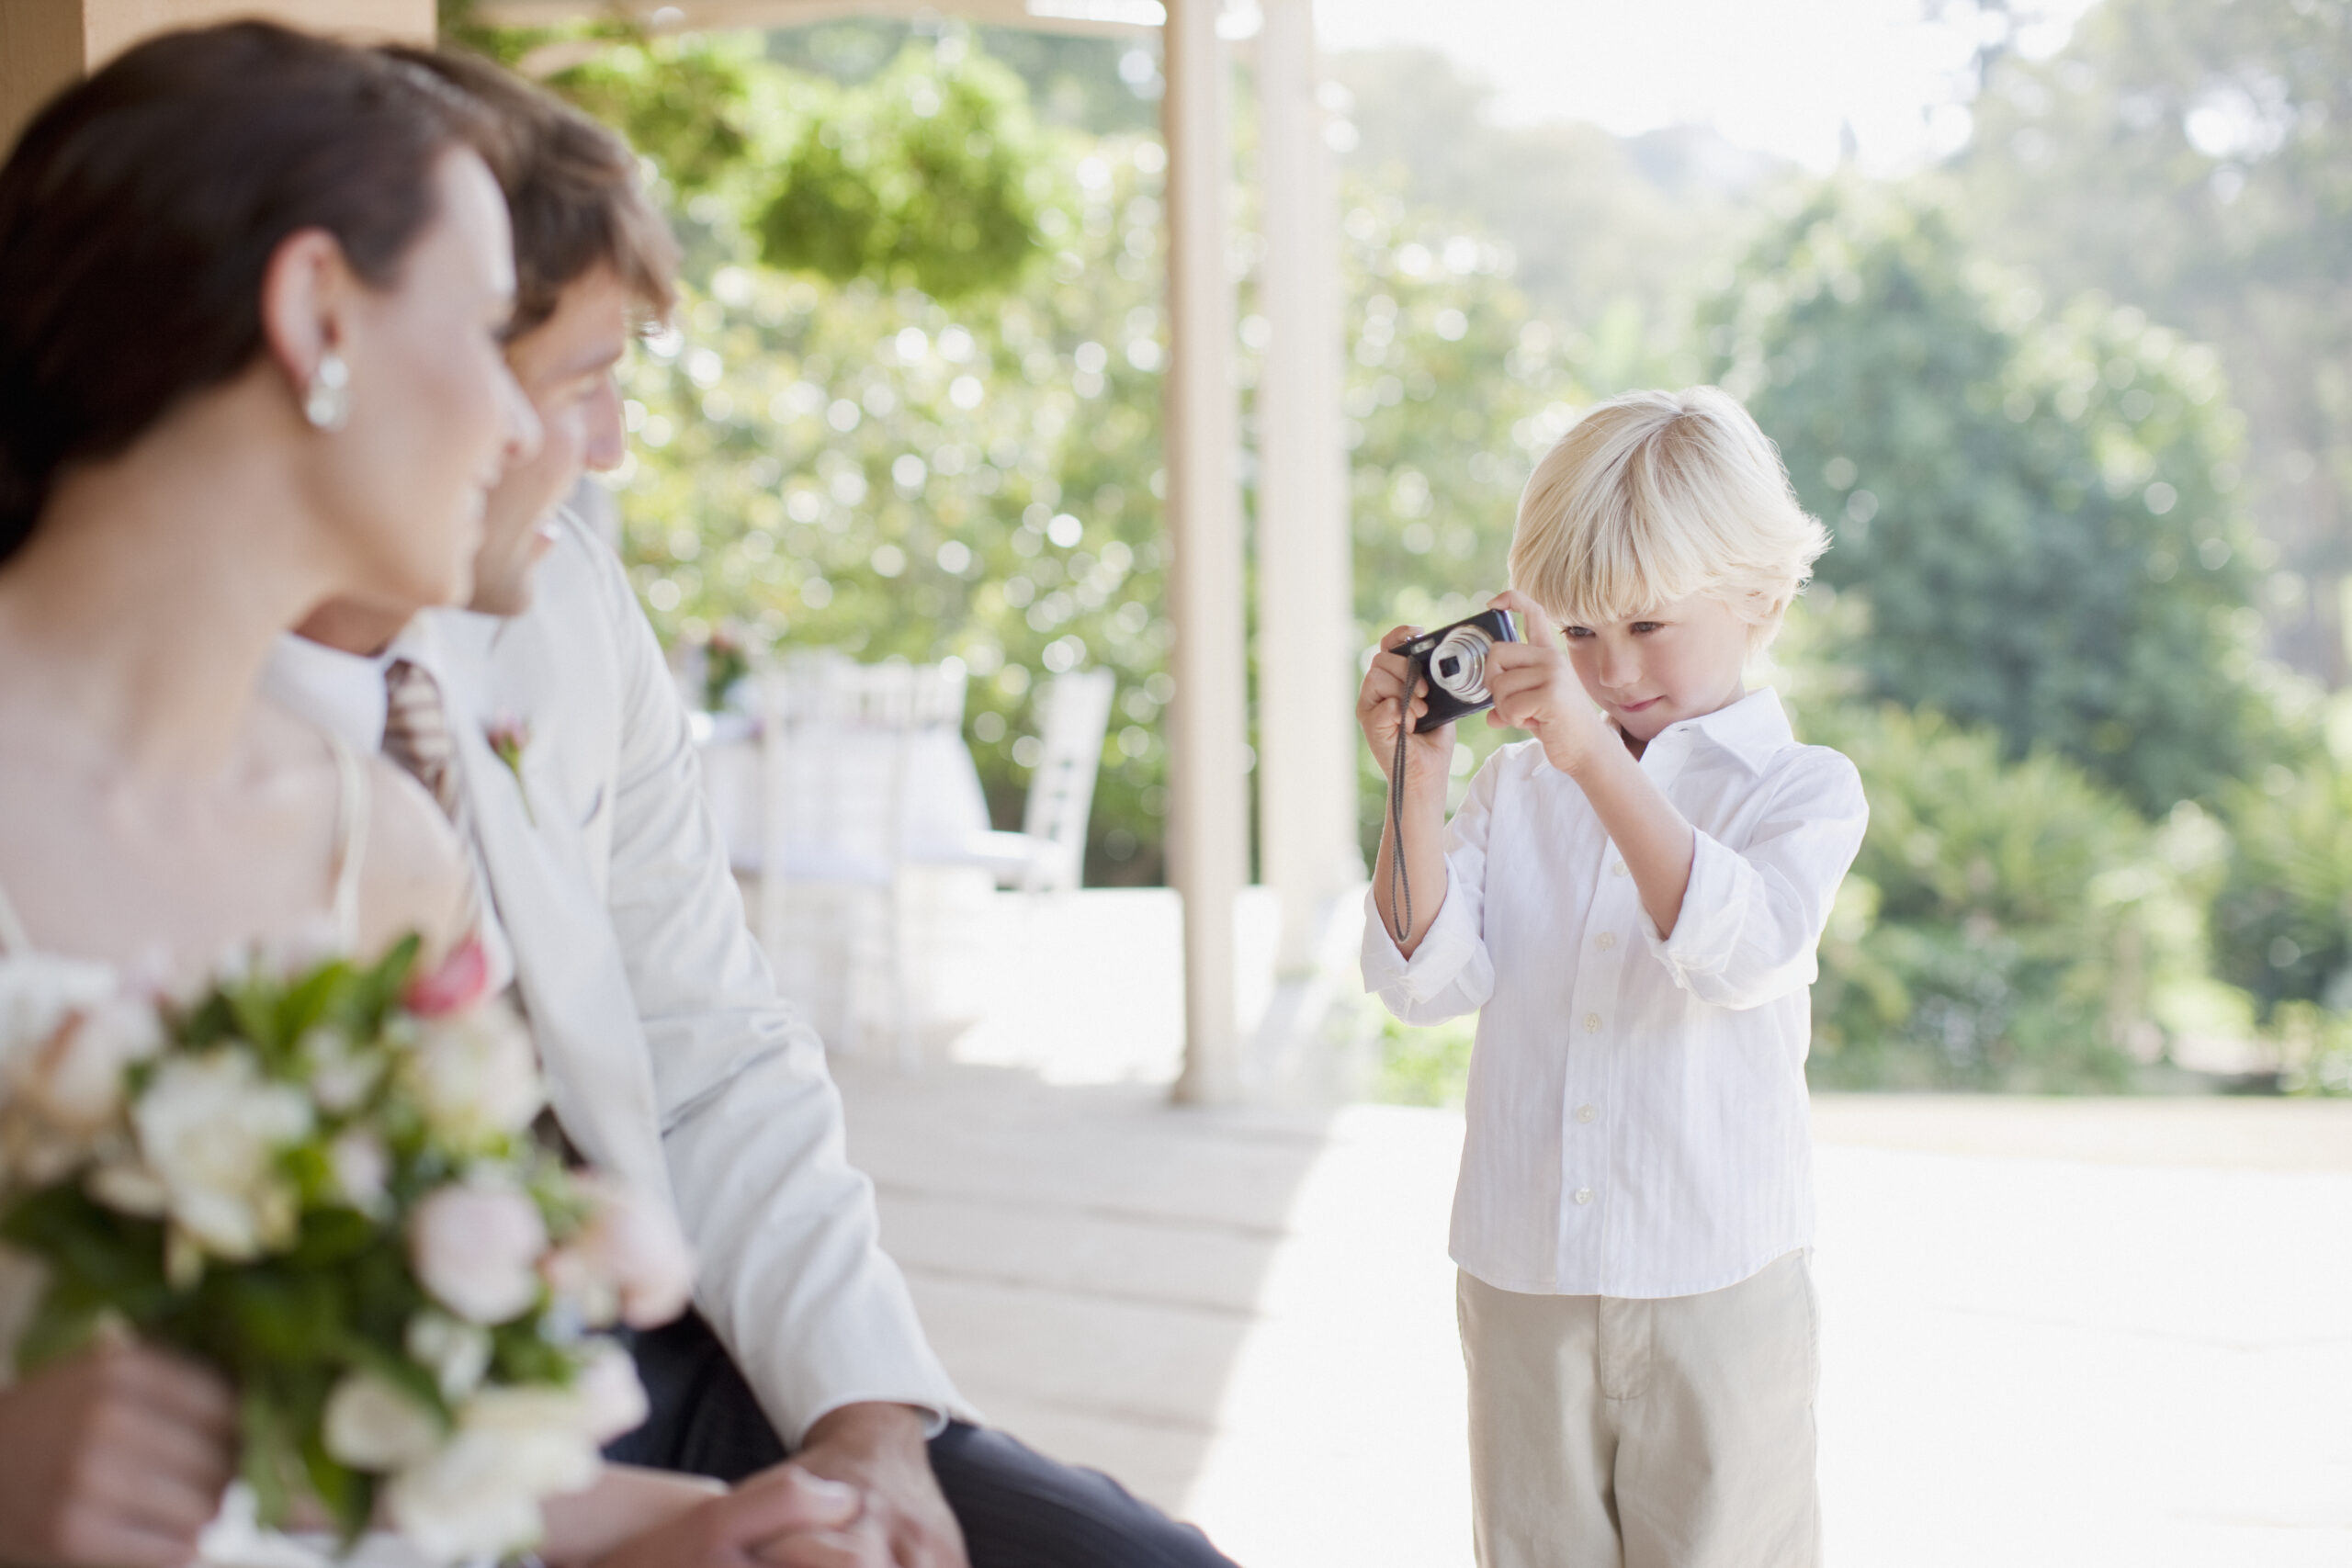 Boy taking picture of bride and groom